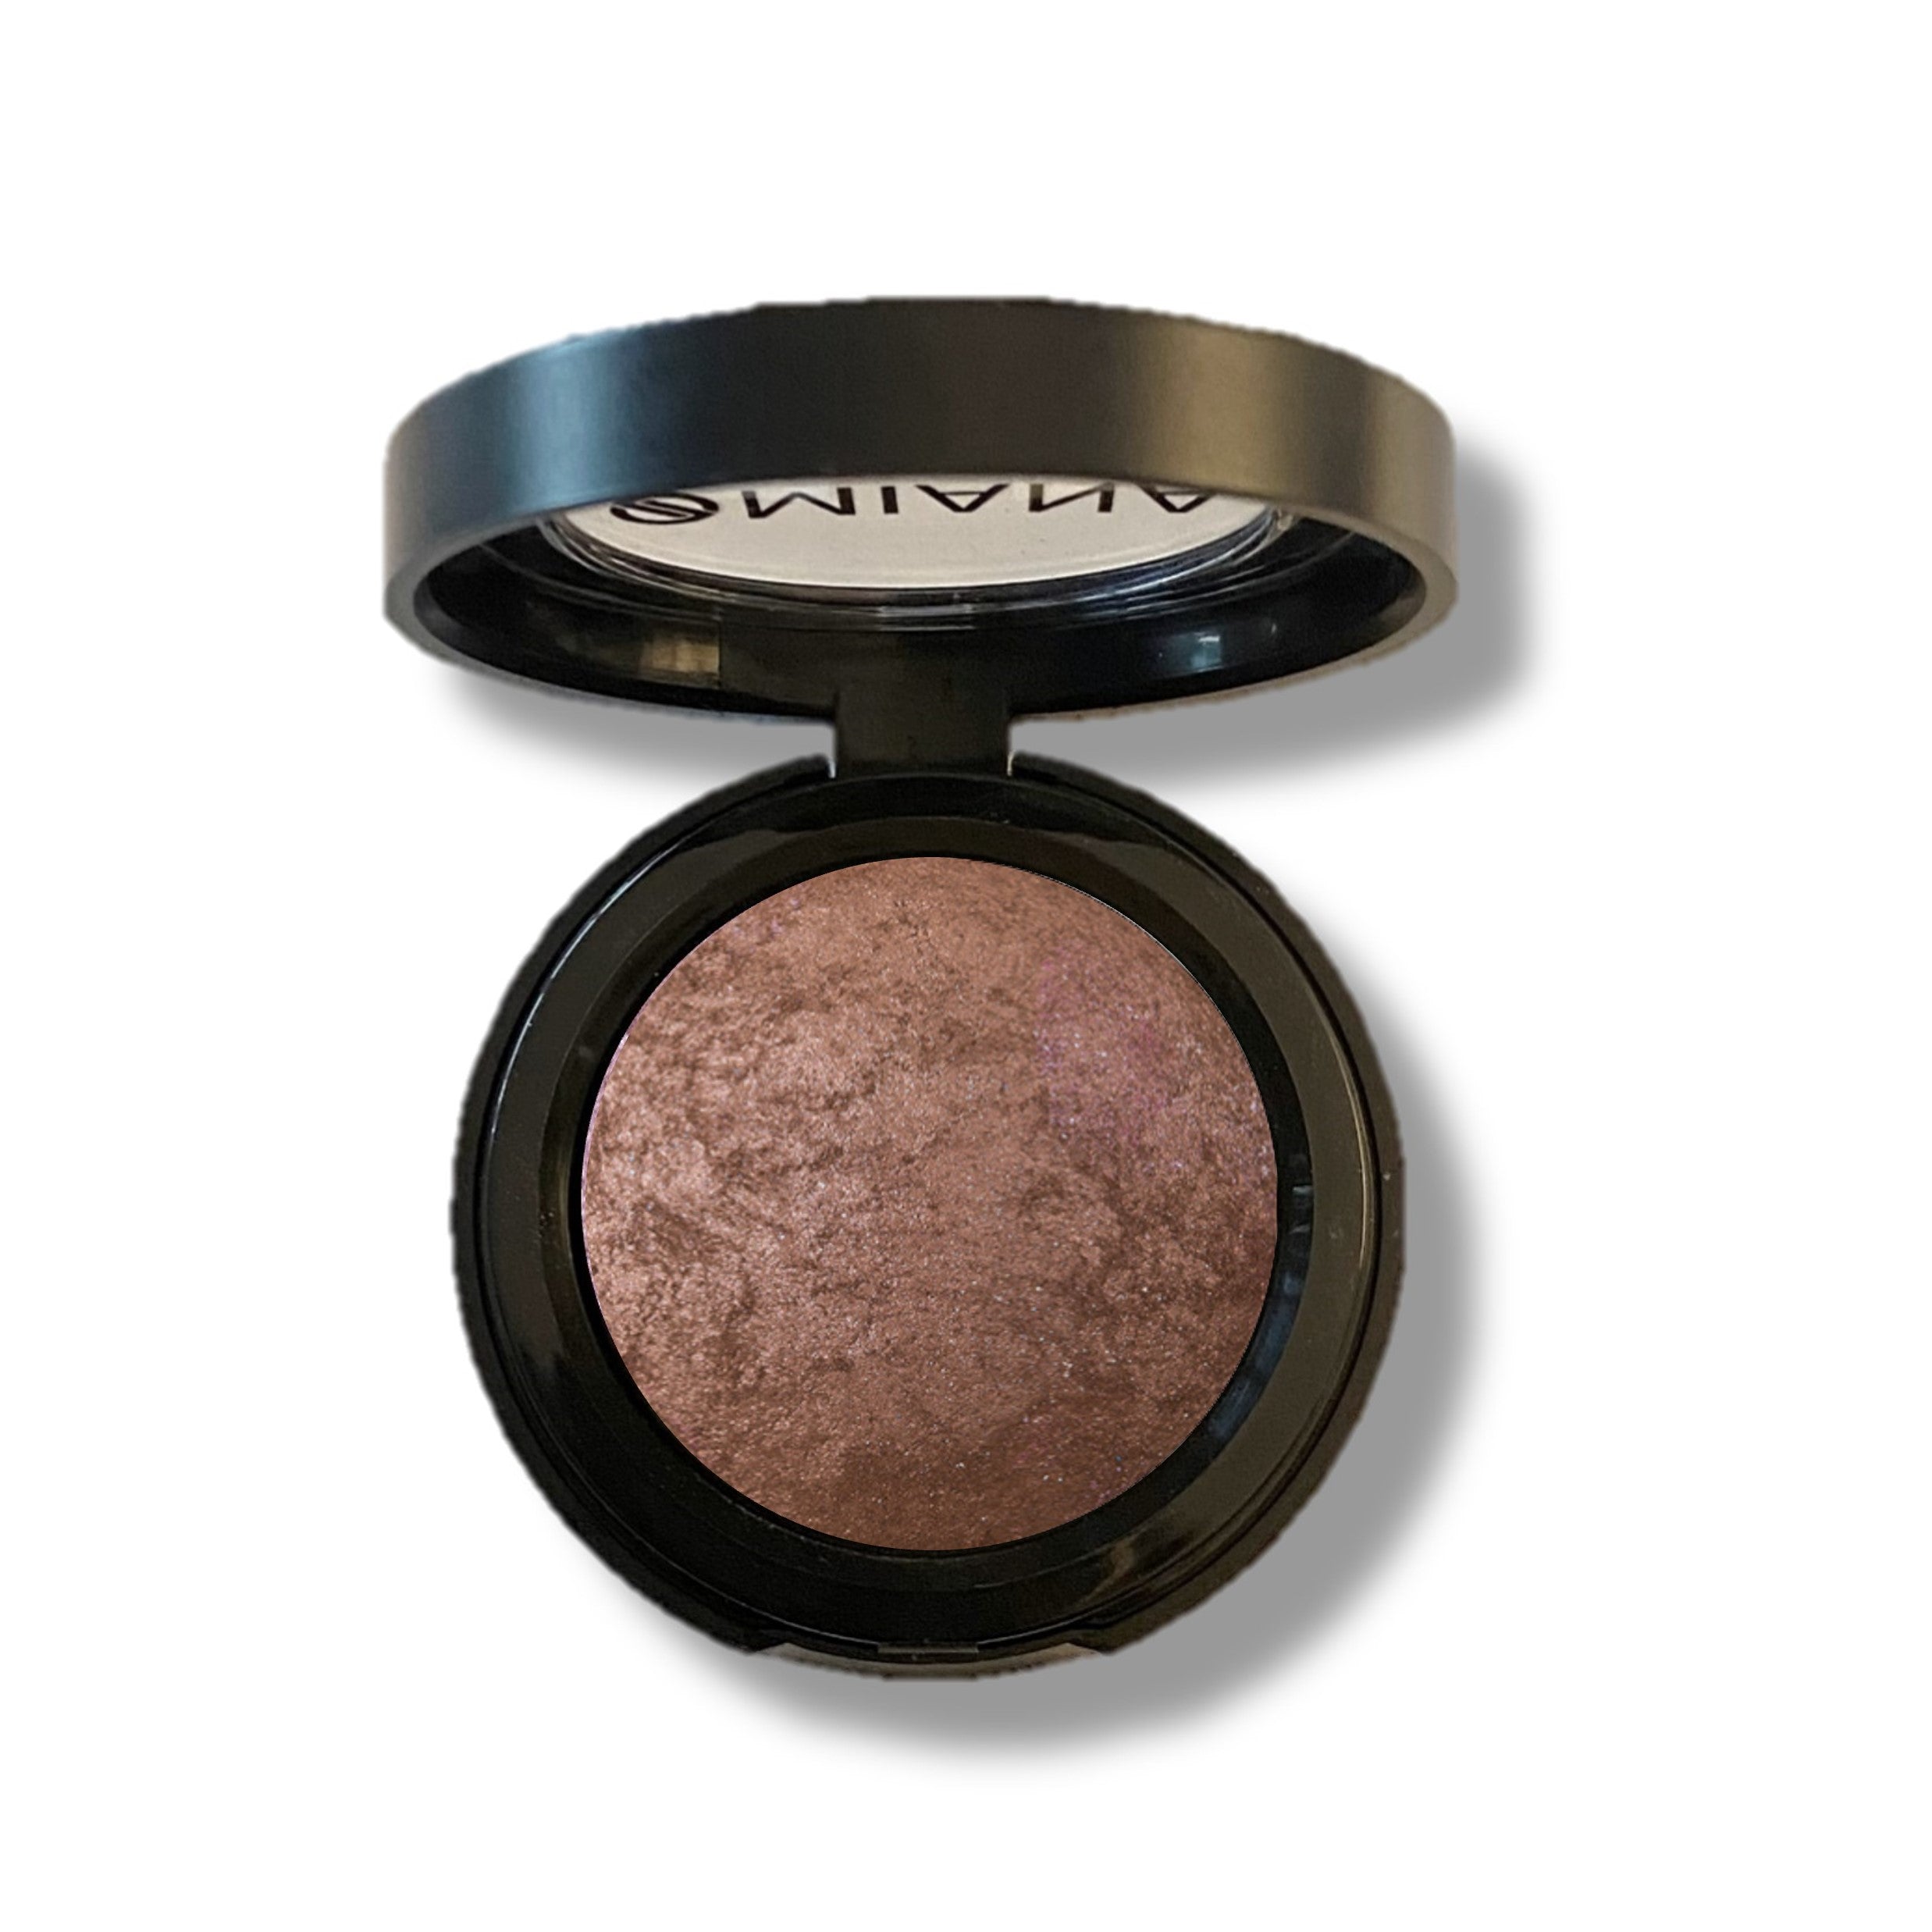 Creamy Baked Mineral Eyeshadow - Talc-Free, Paraben-Free, & More!